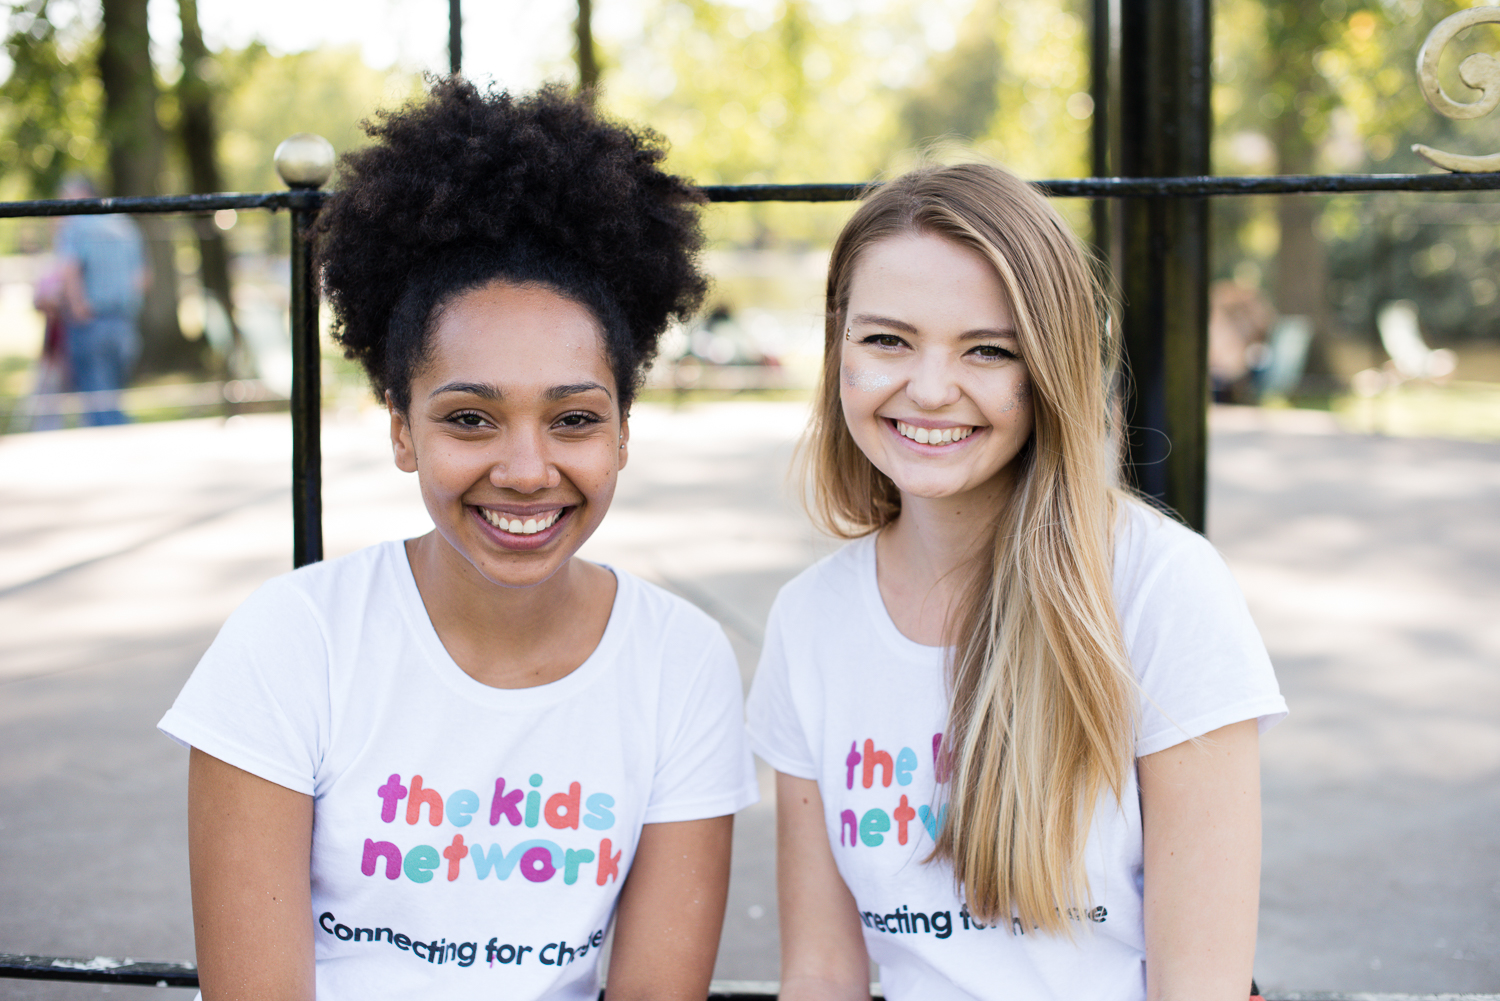 Volunteer With The Kids Network Today